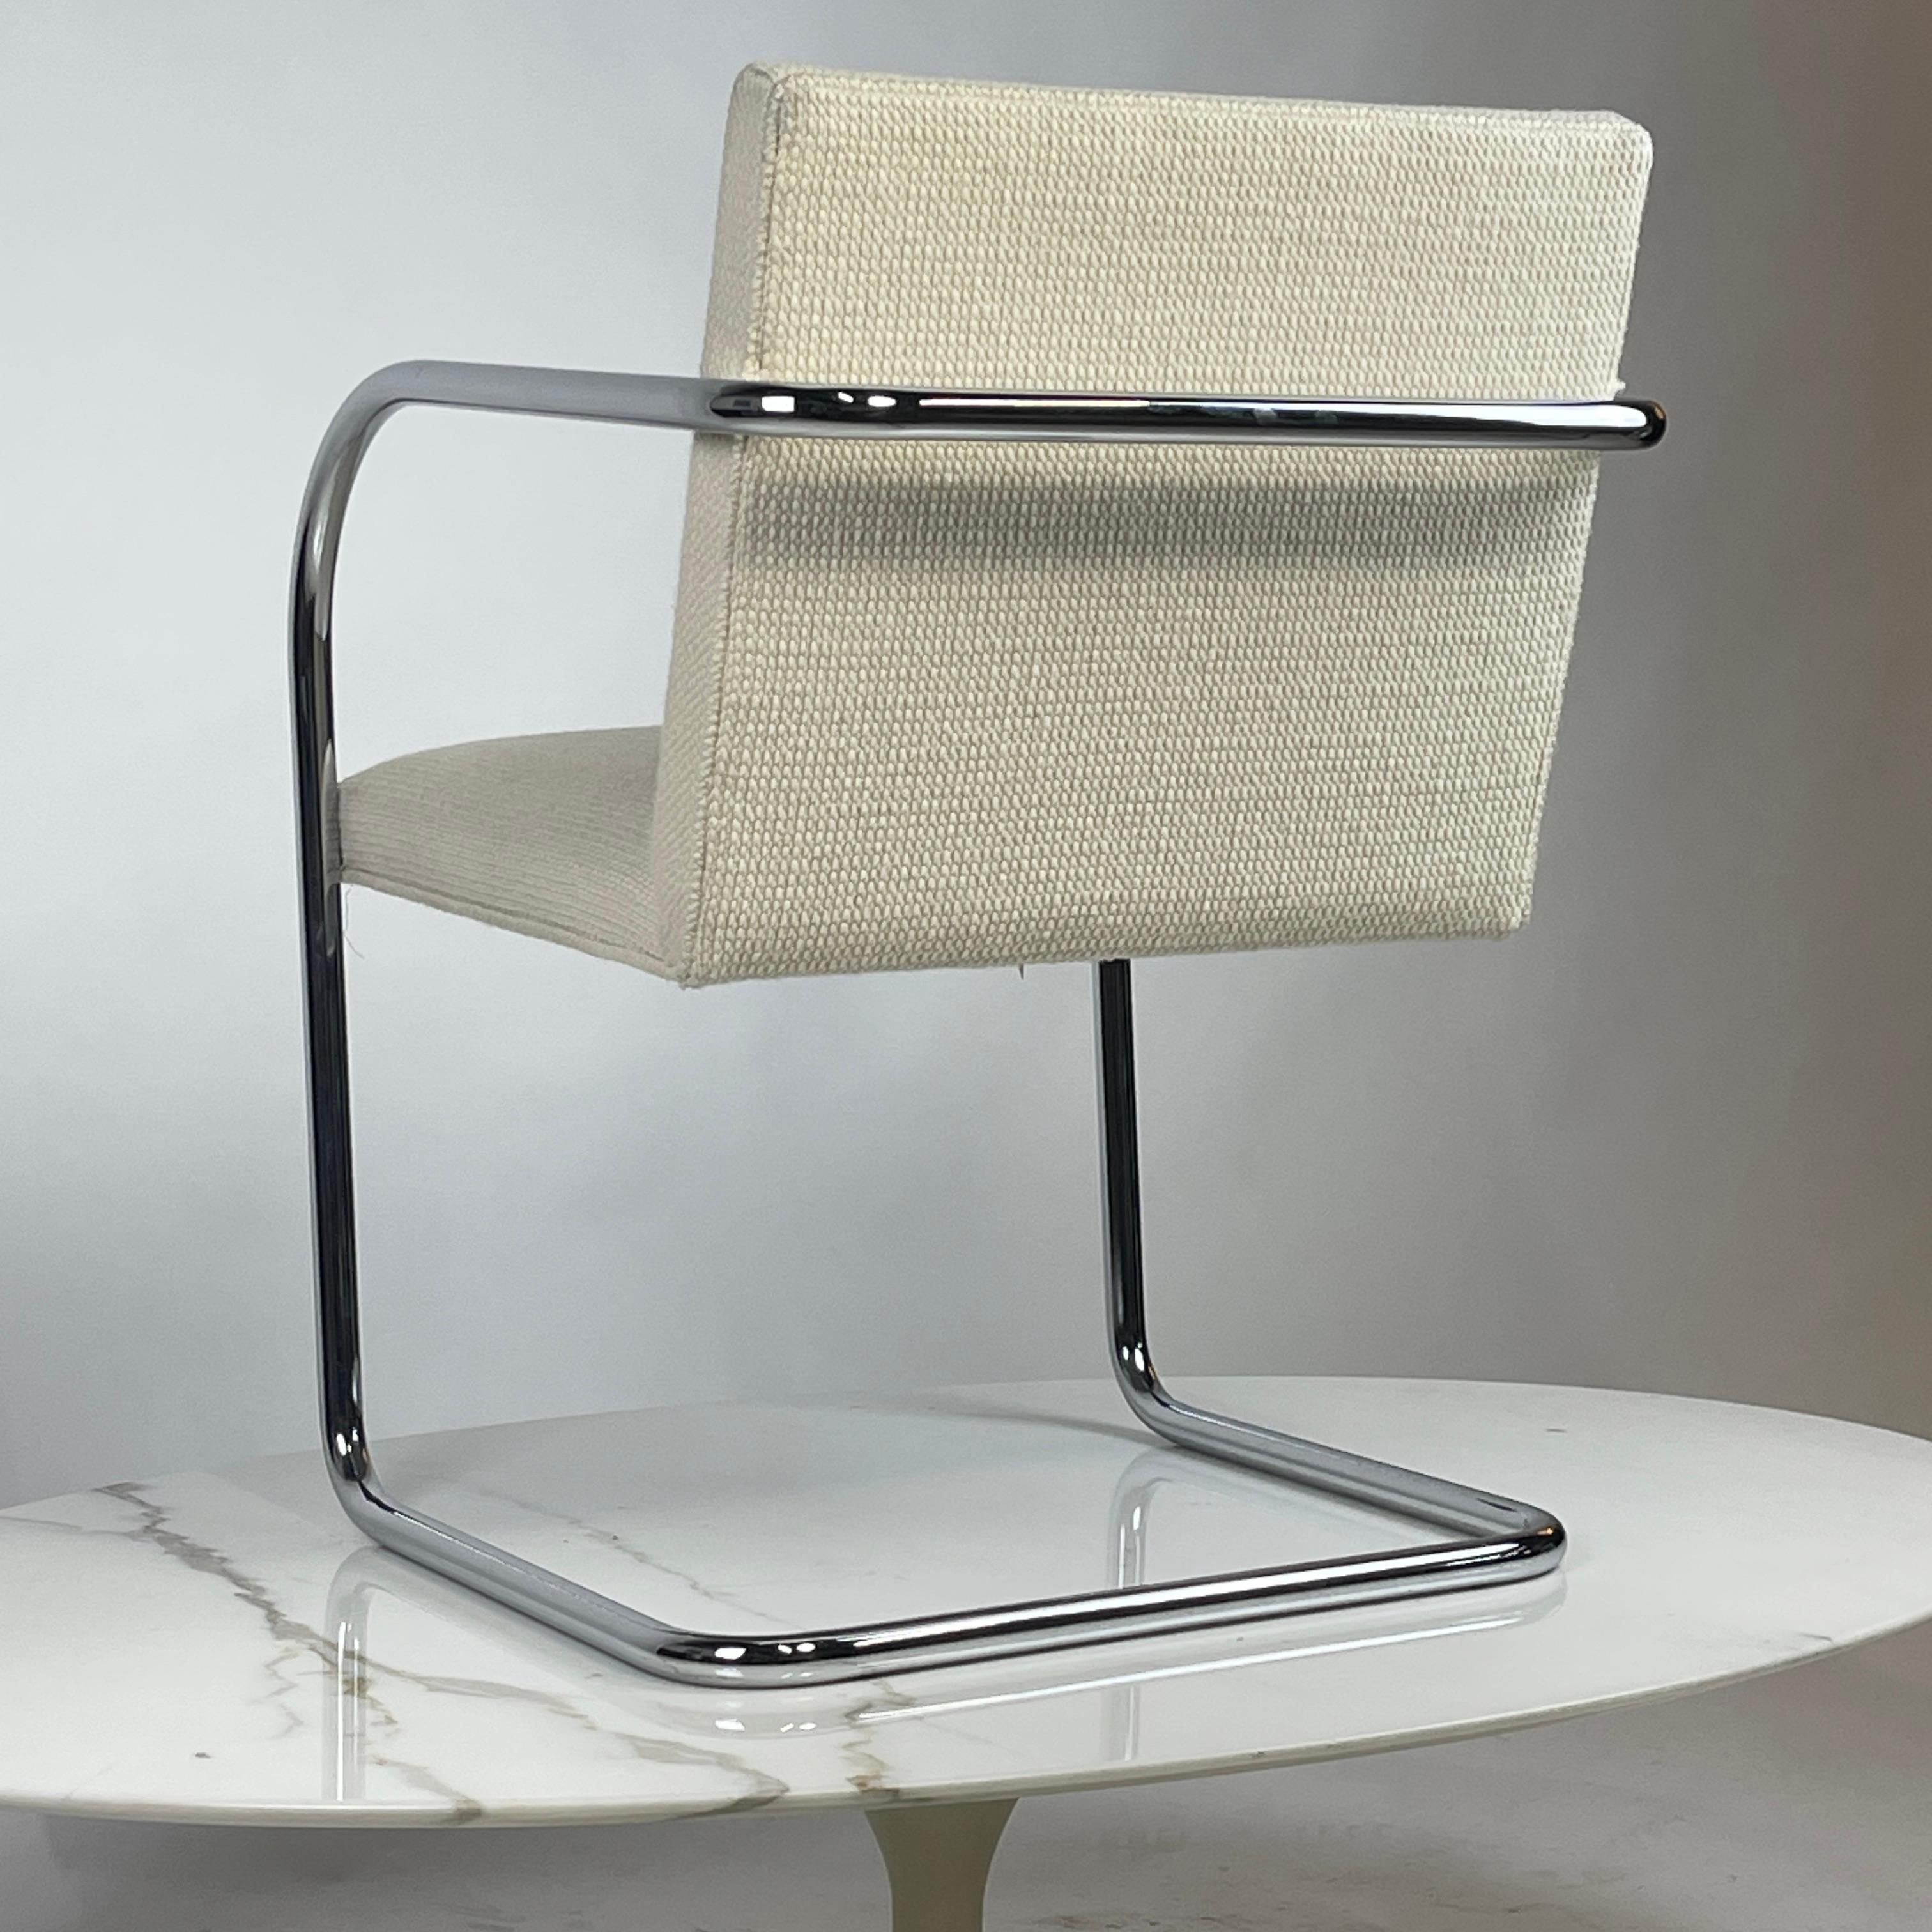 Italian Set of 4 Mies Van Der Rohe for Knoll Brno Chairs in Cato Upholstery 60 available For Sale